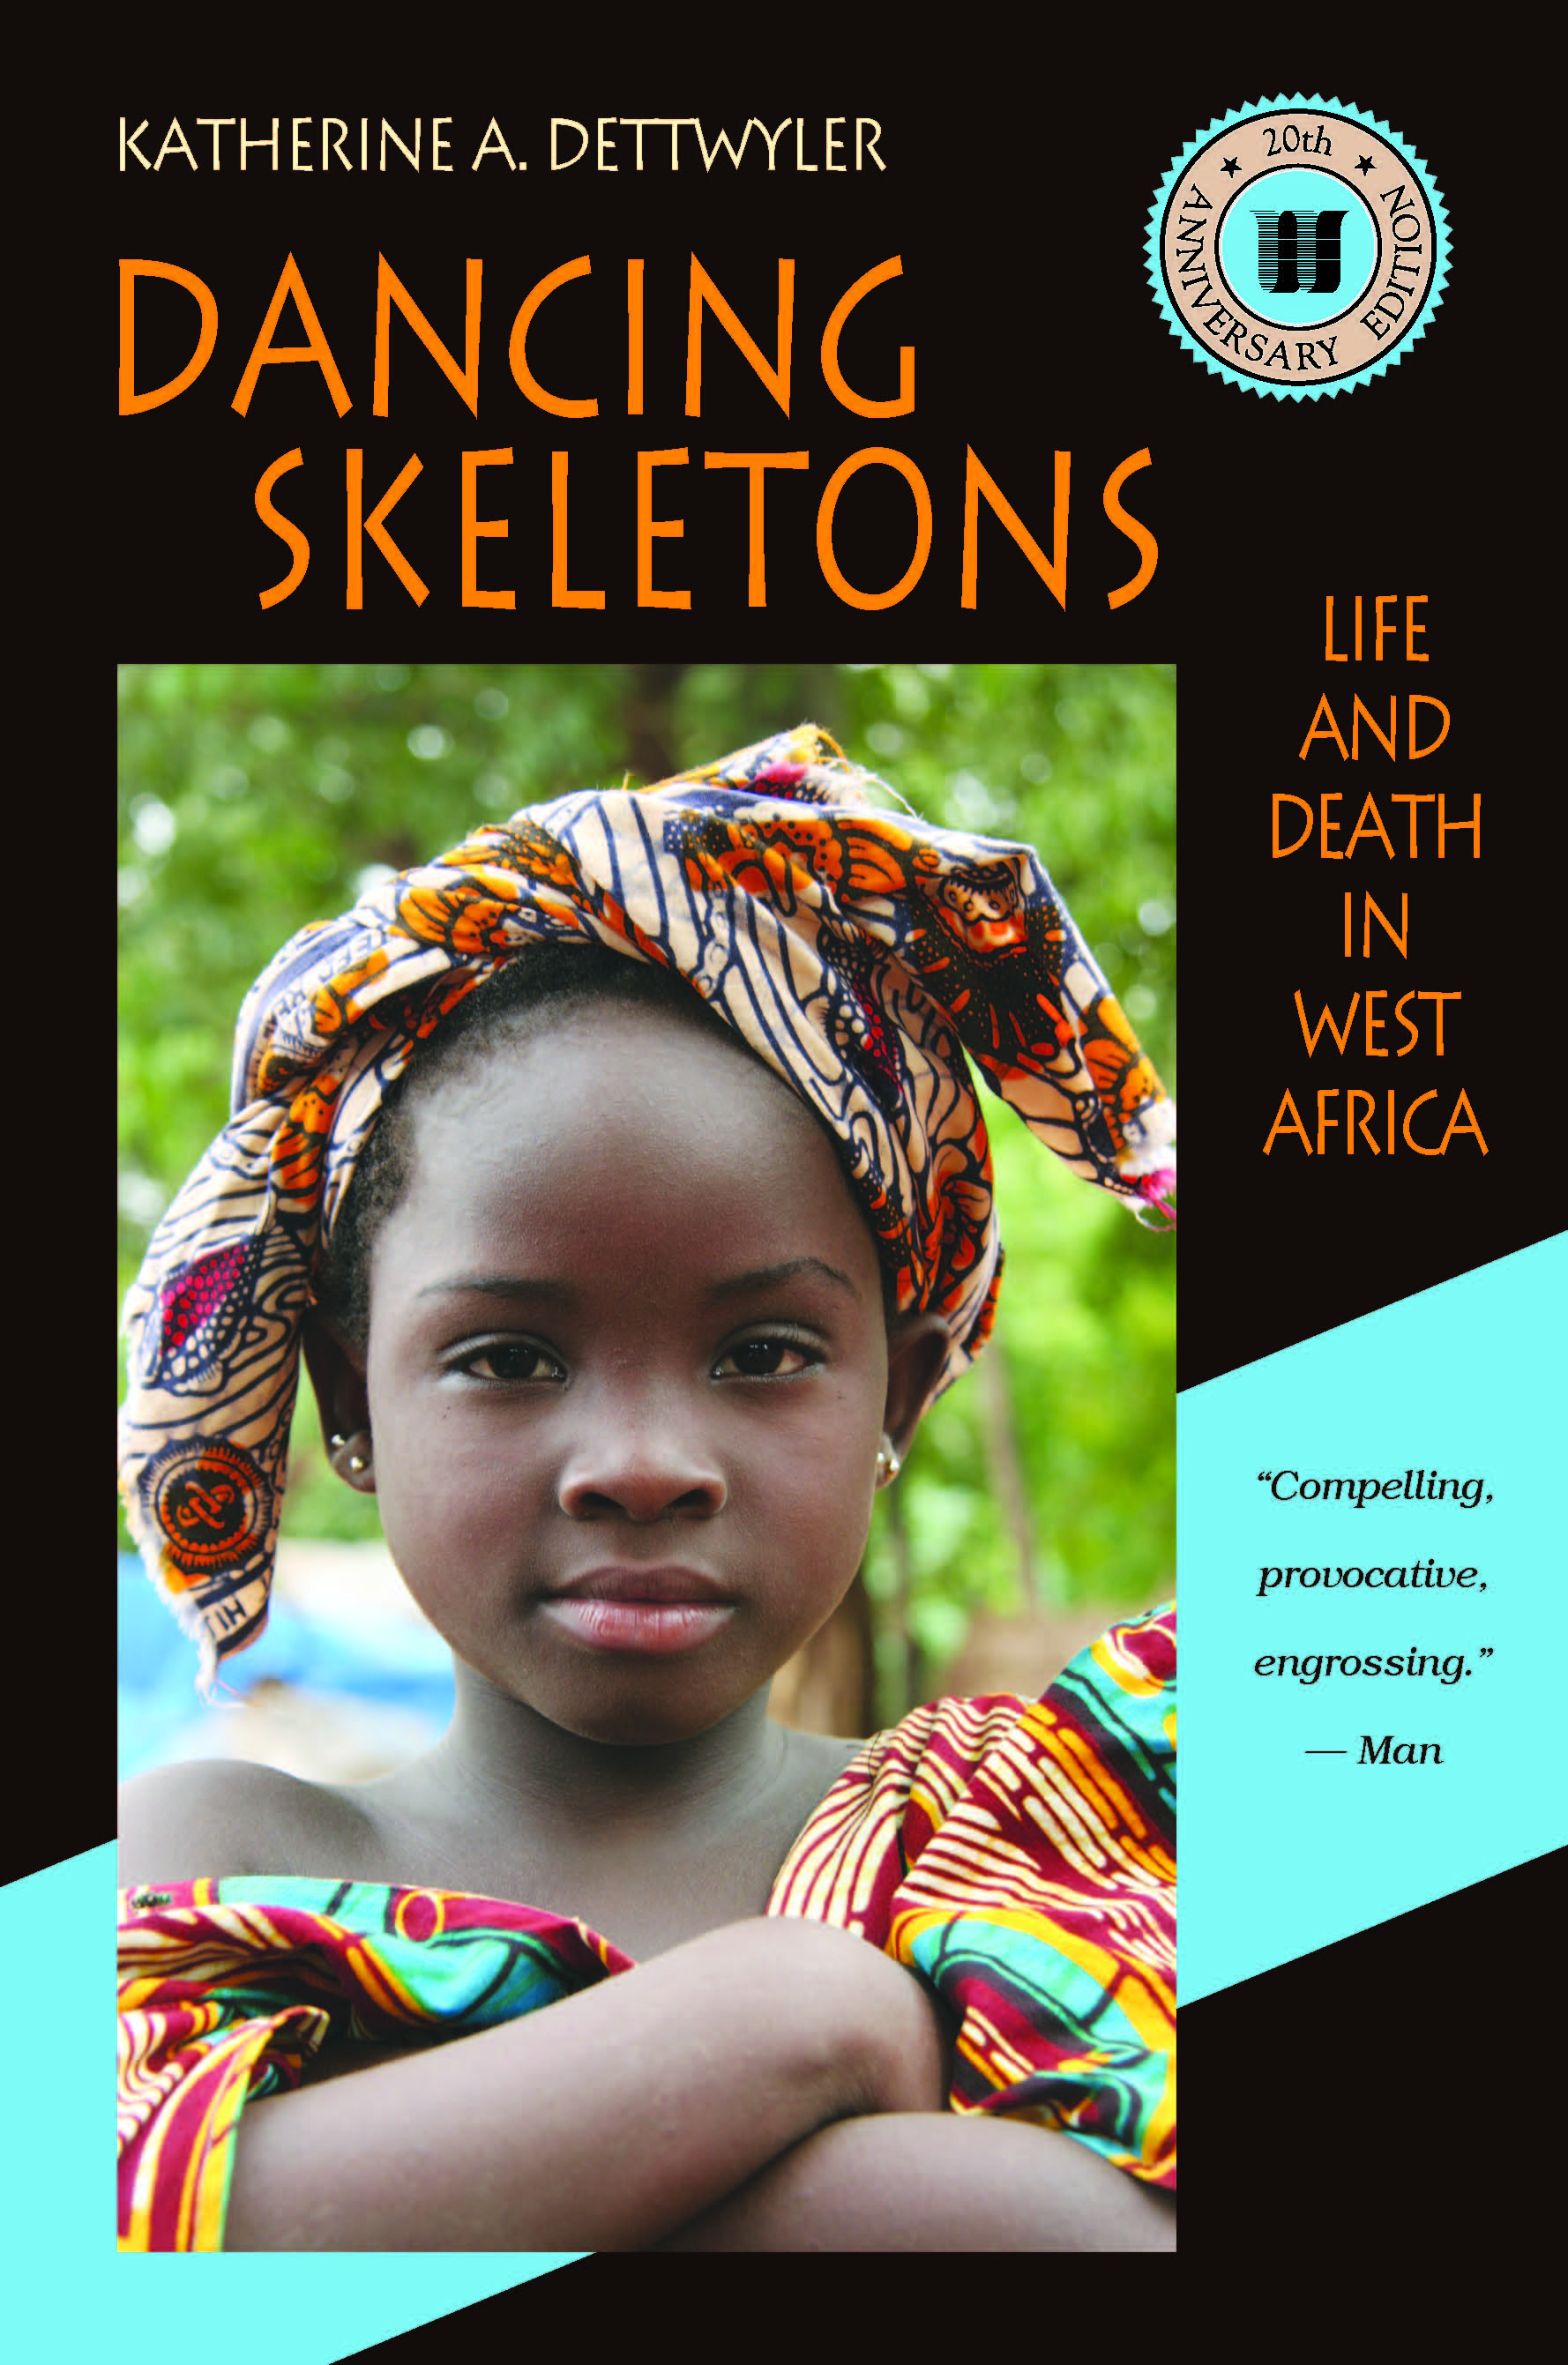 Dancing Skeletons: Life and Death in West Africa, 20th Anniversary Edition by Katherine A. Dettwyler